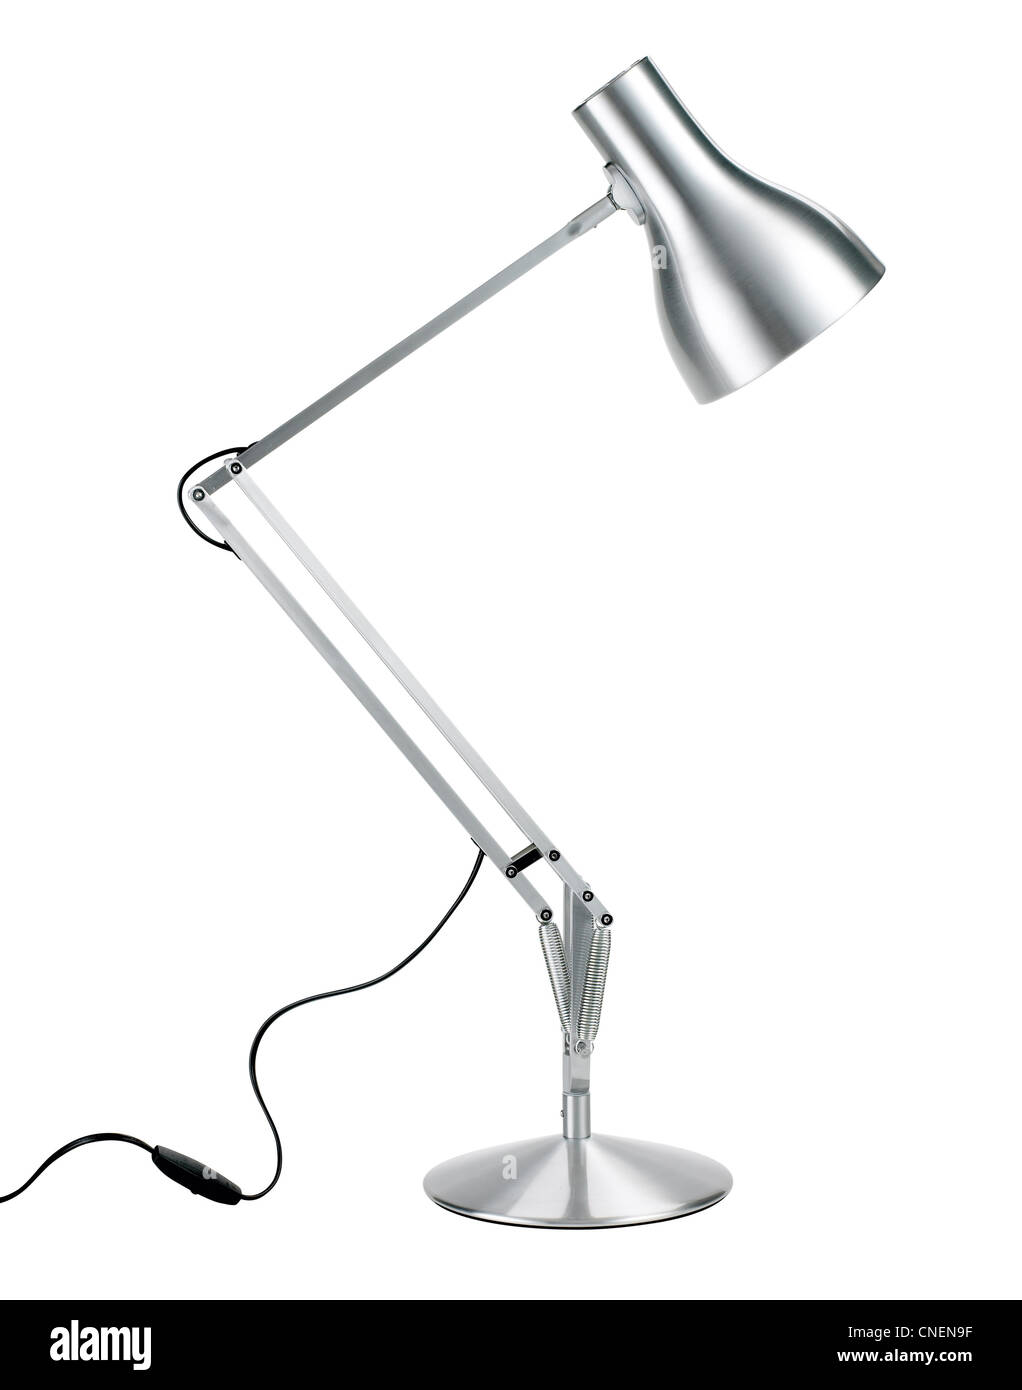 a silver anglepoise desk lamp with clipping path Stock Photo